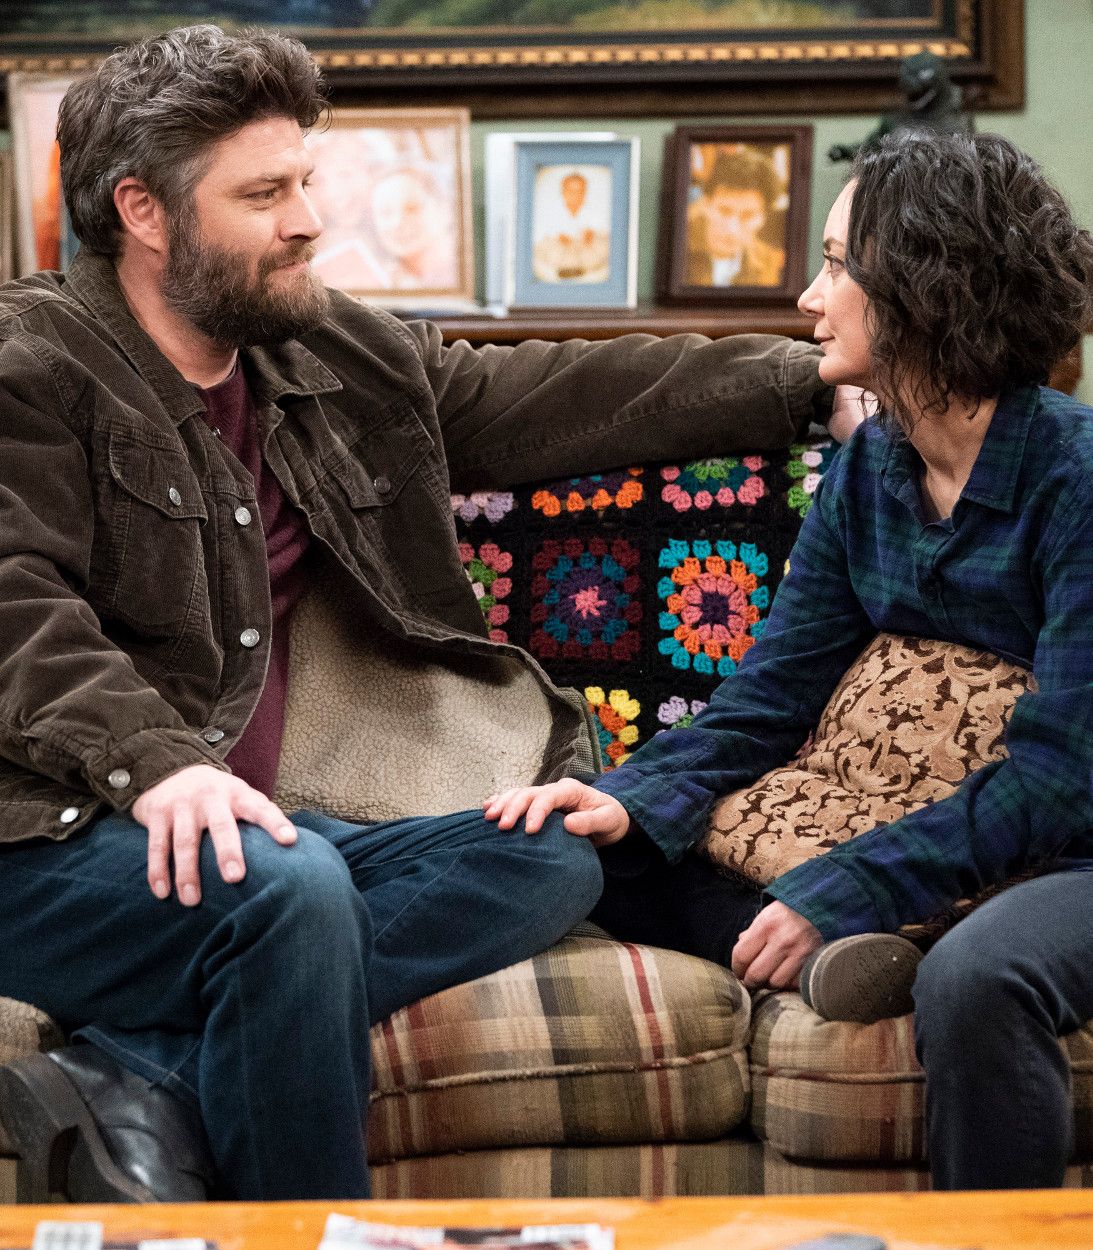 Darlene and Ben in The Conners